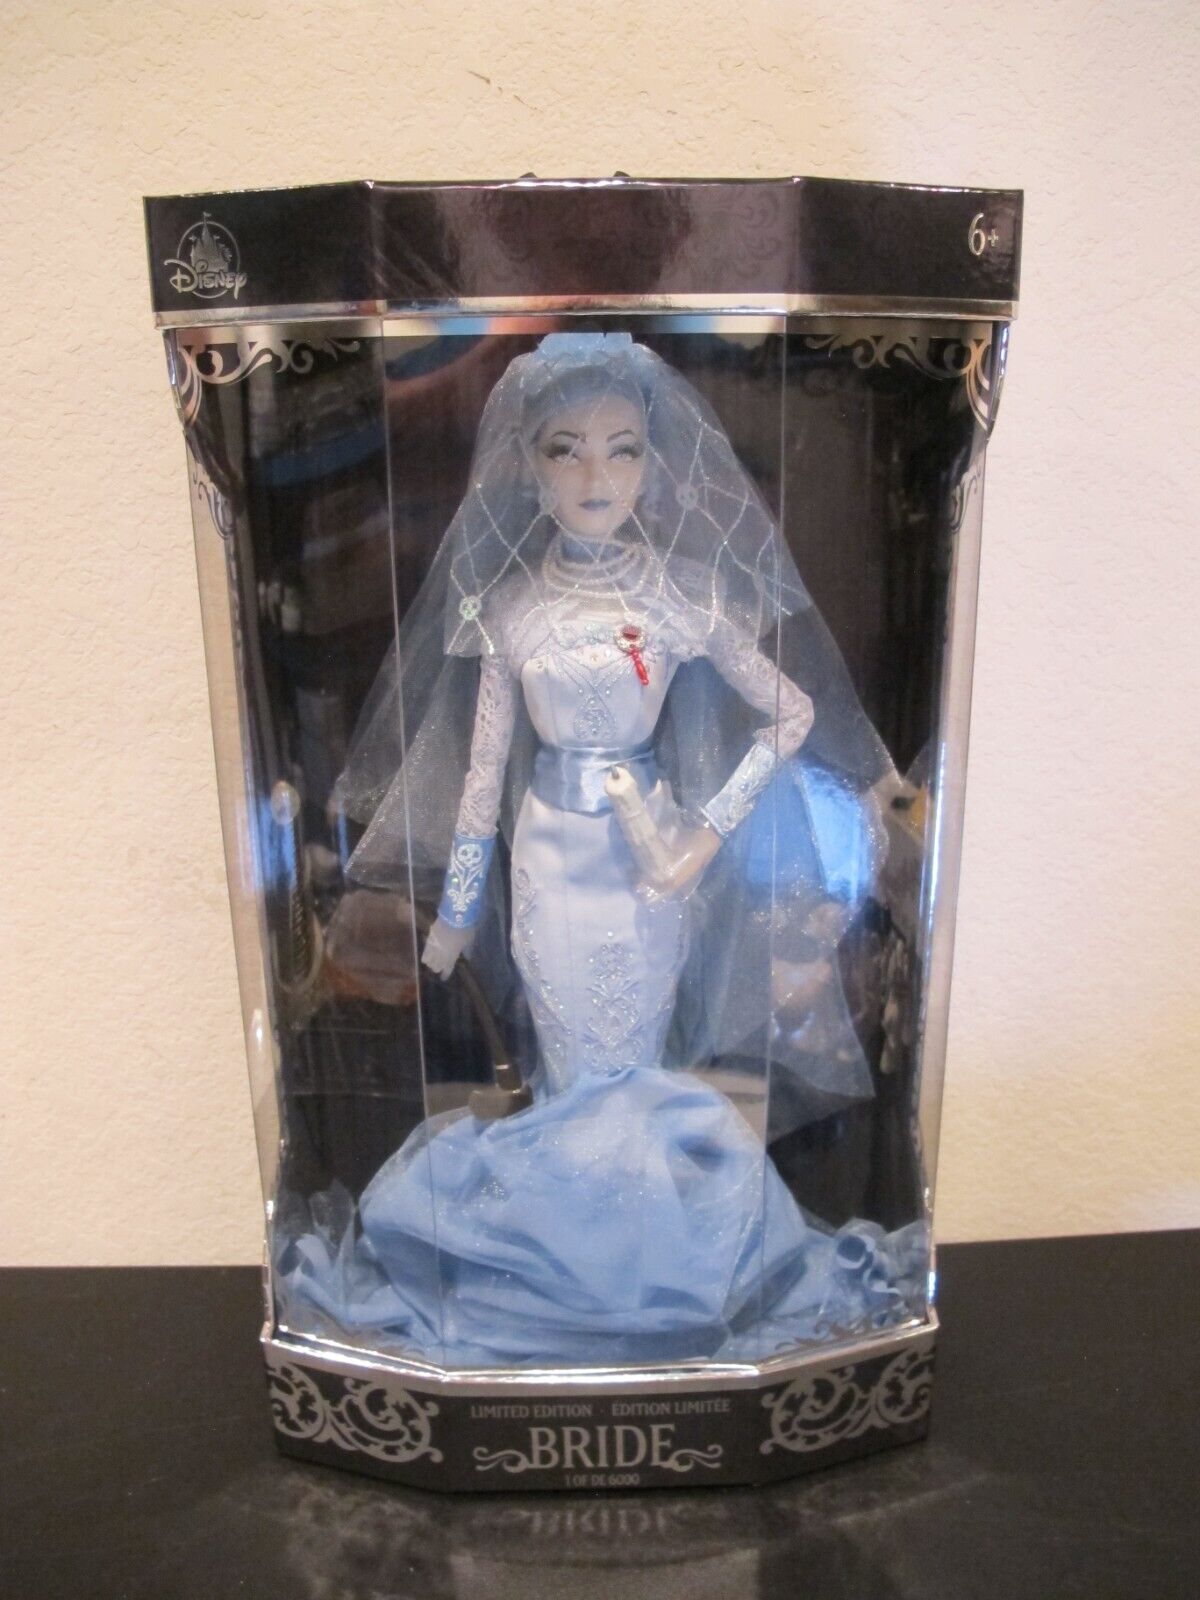 Disney Limited Edition Haunted Mansion The Bride Constance Hatchaway Doll